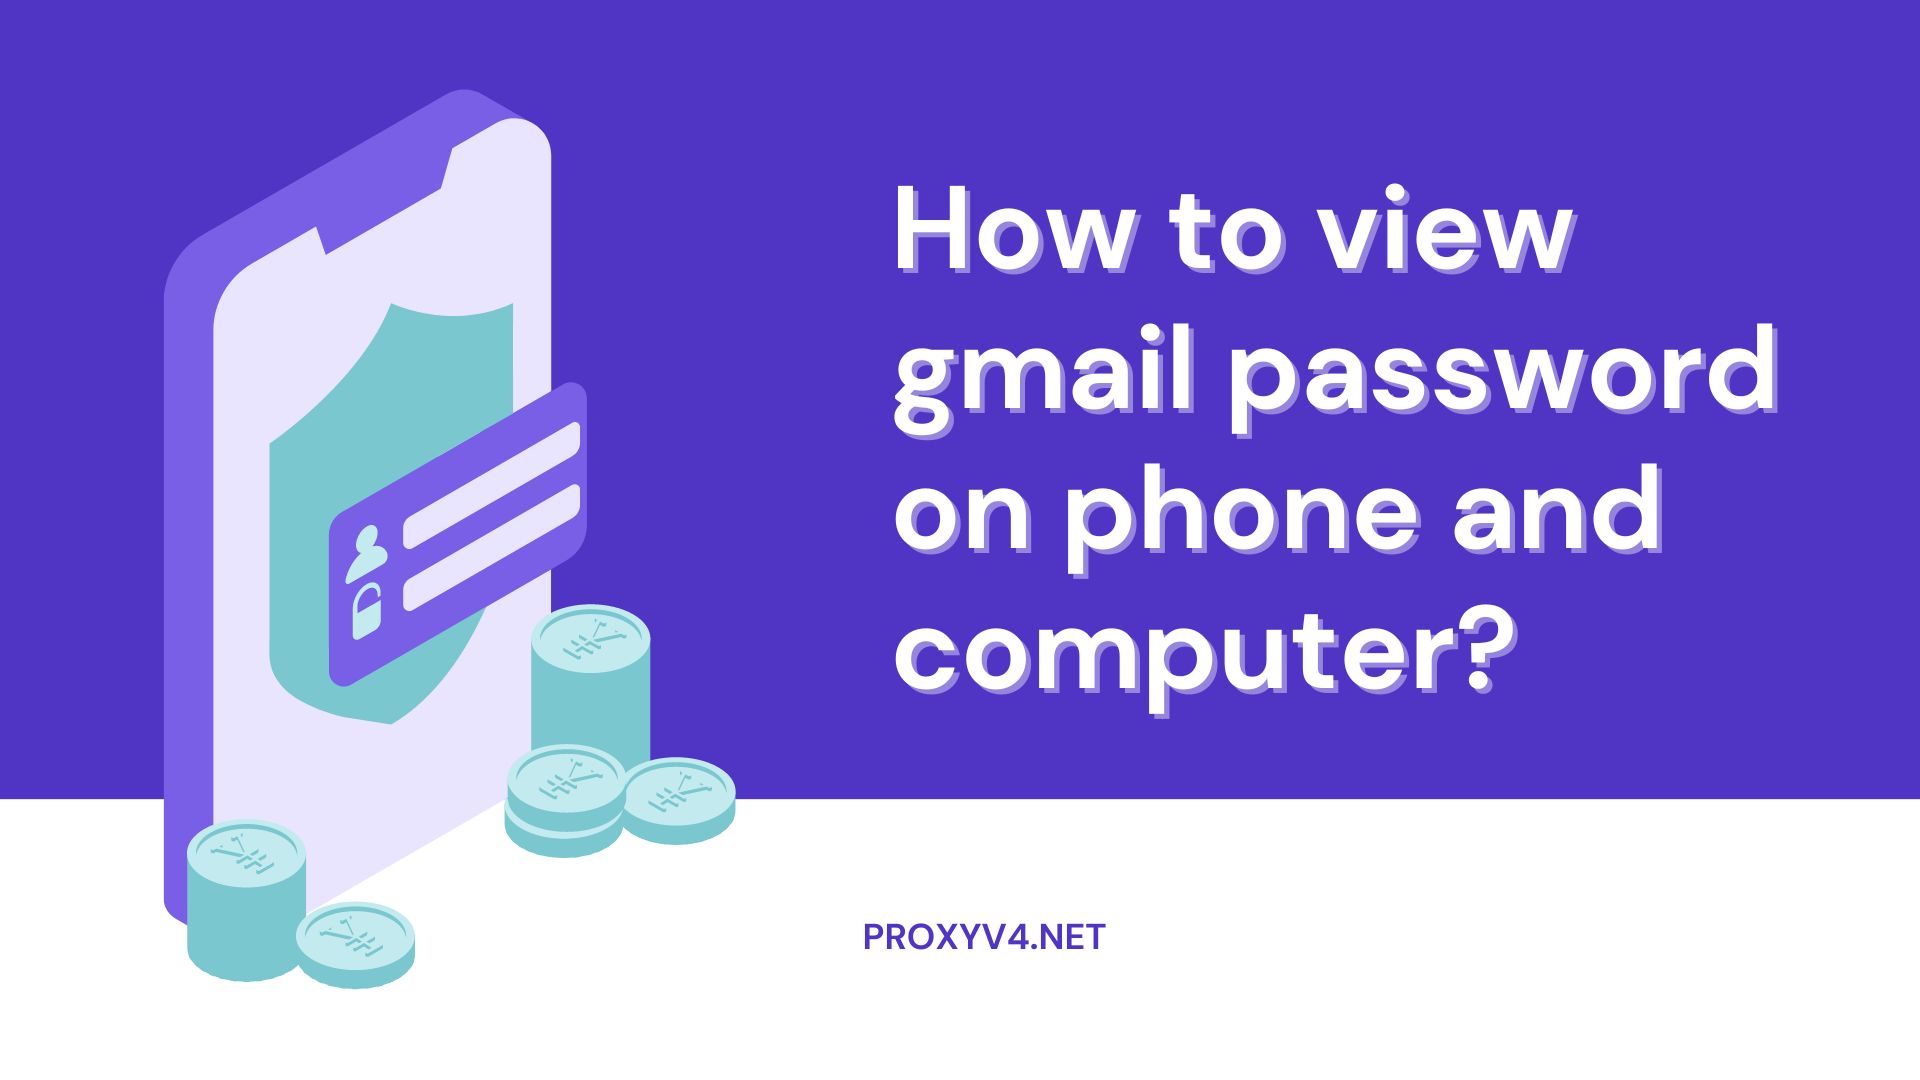 How to view gmail password on phone and computer?